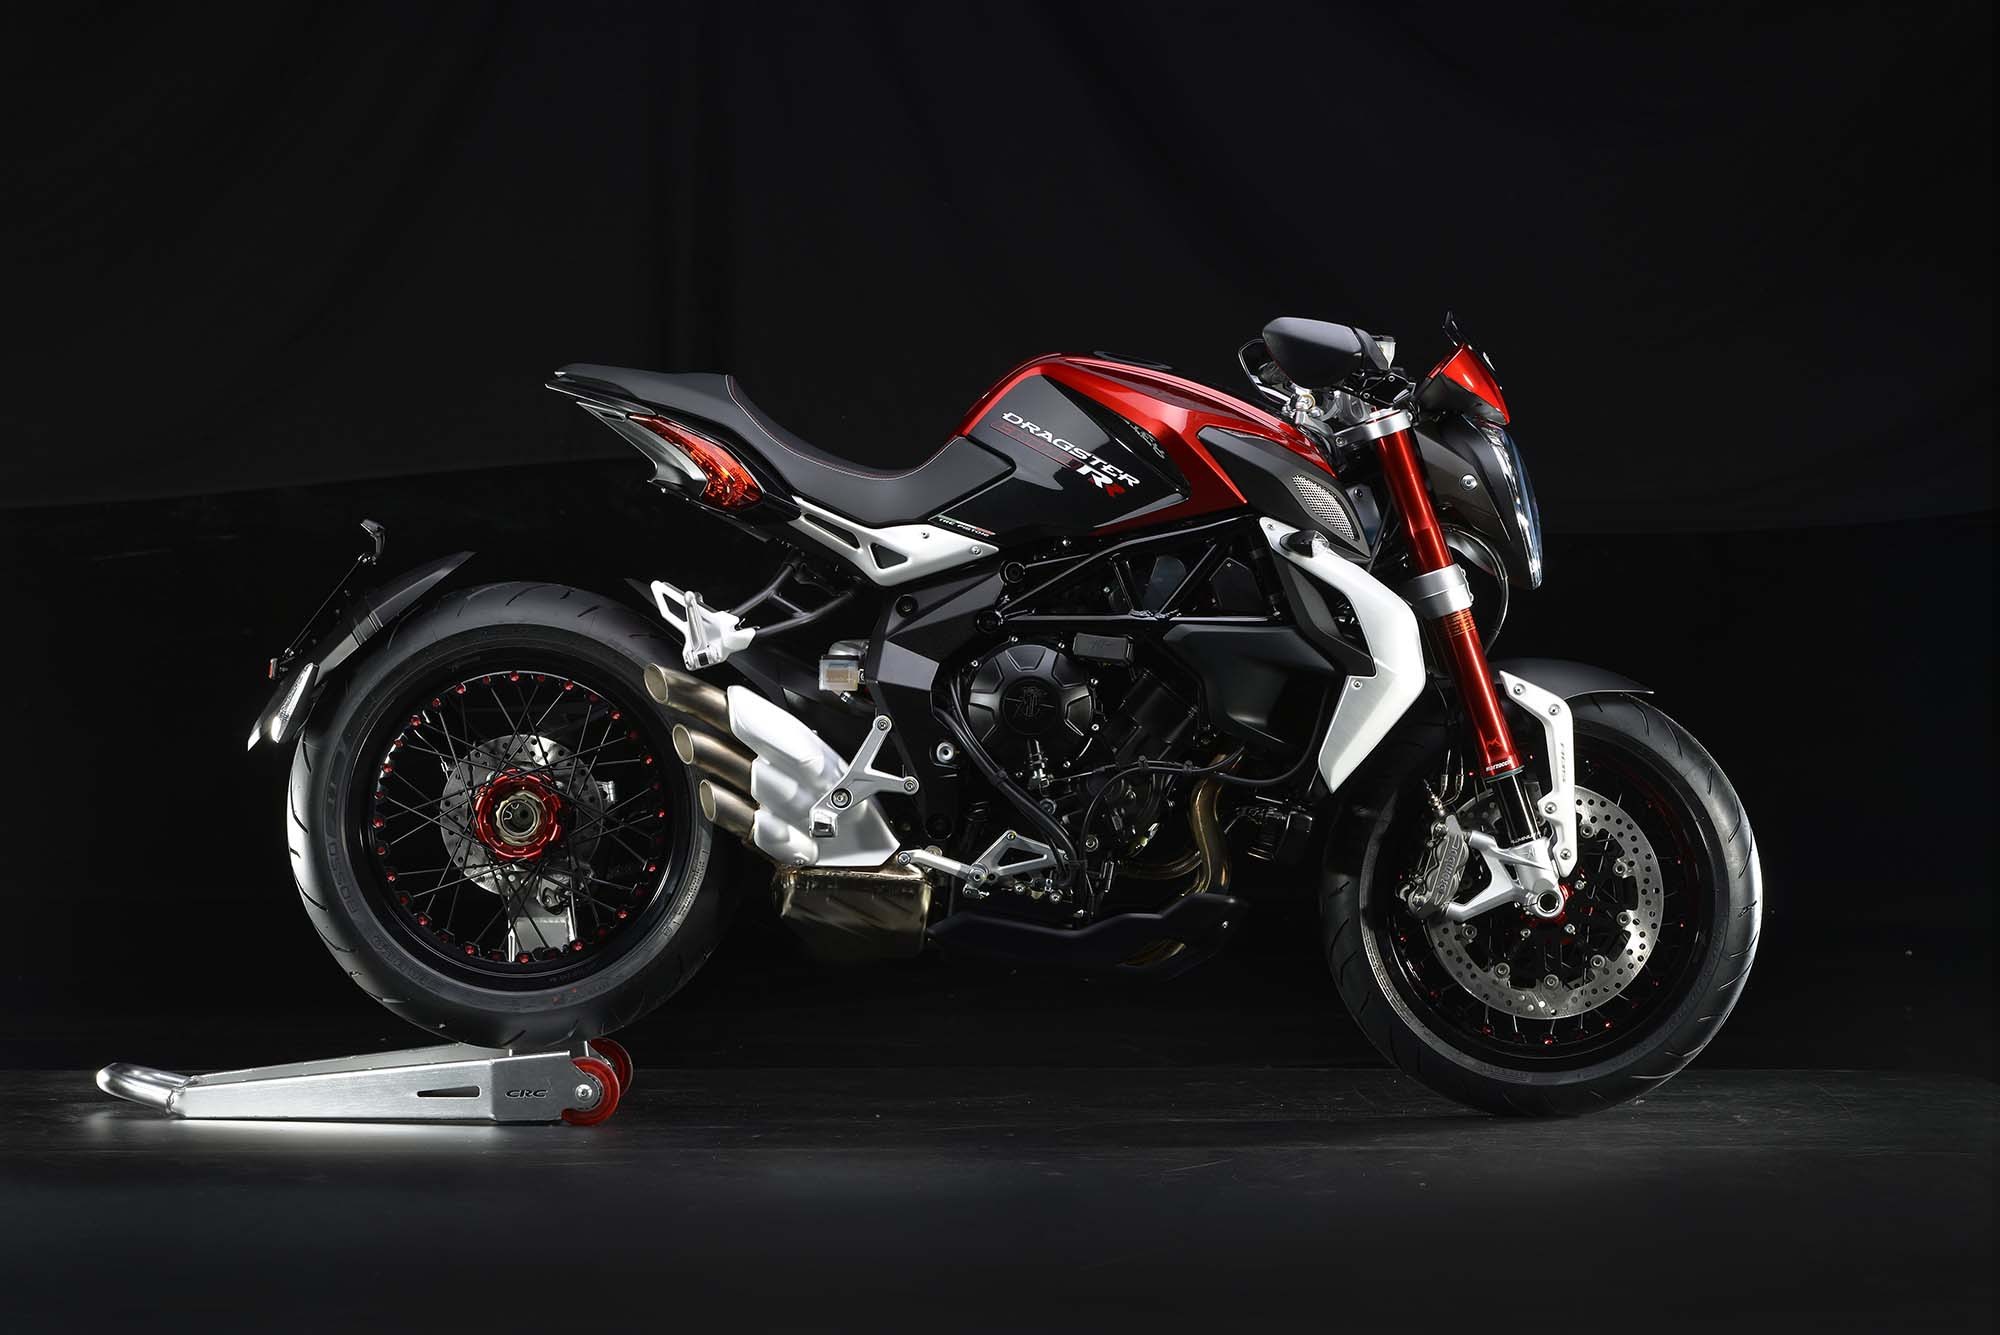 General 2000x1335 motorcycle MV agusta vehicle black background Italian motorcycles simple background low light